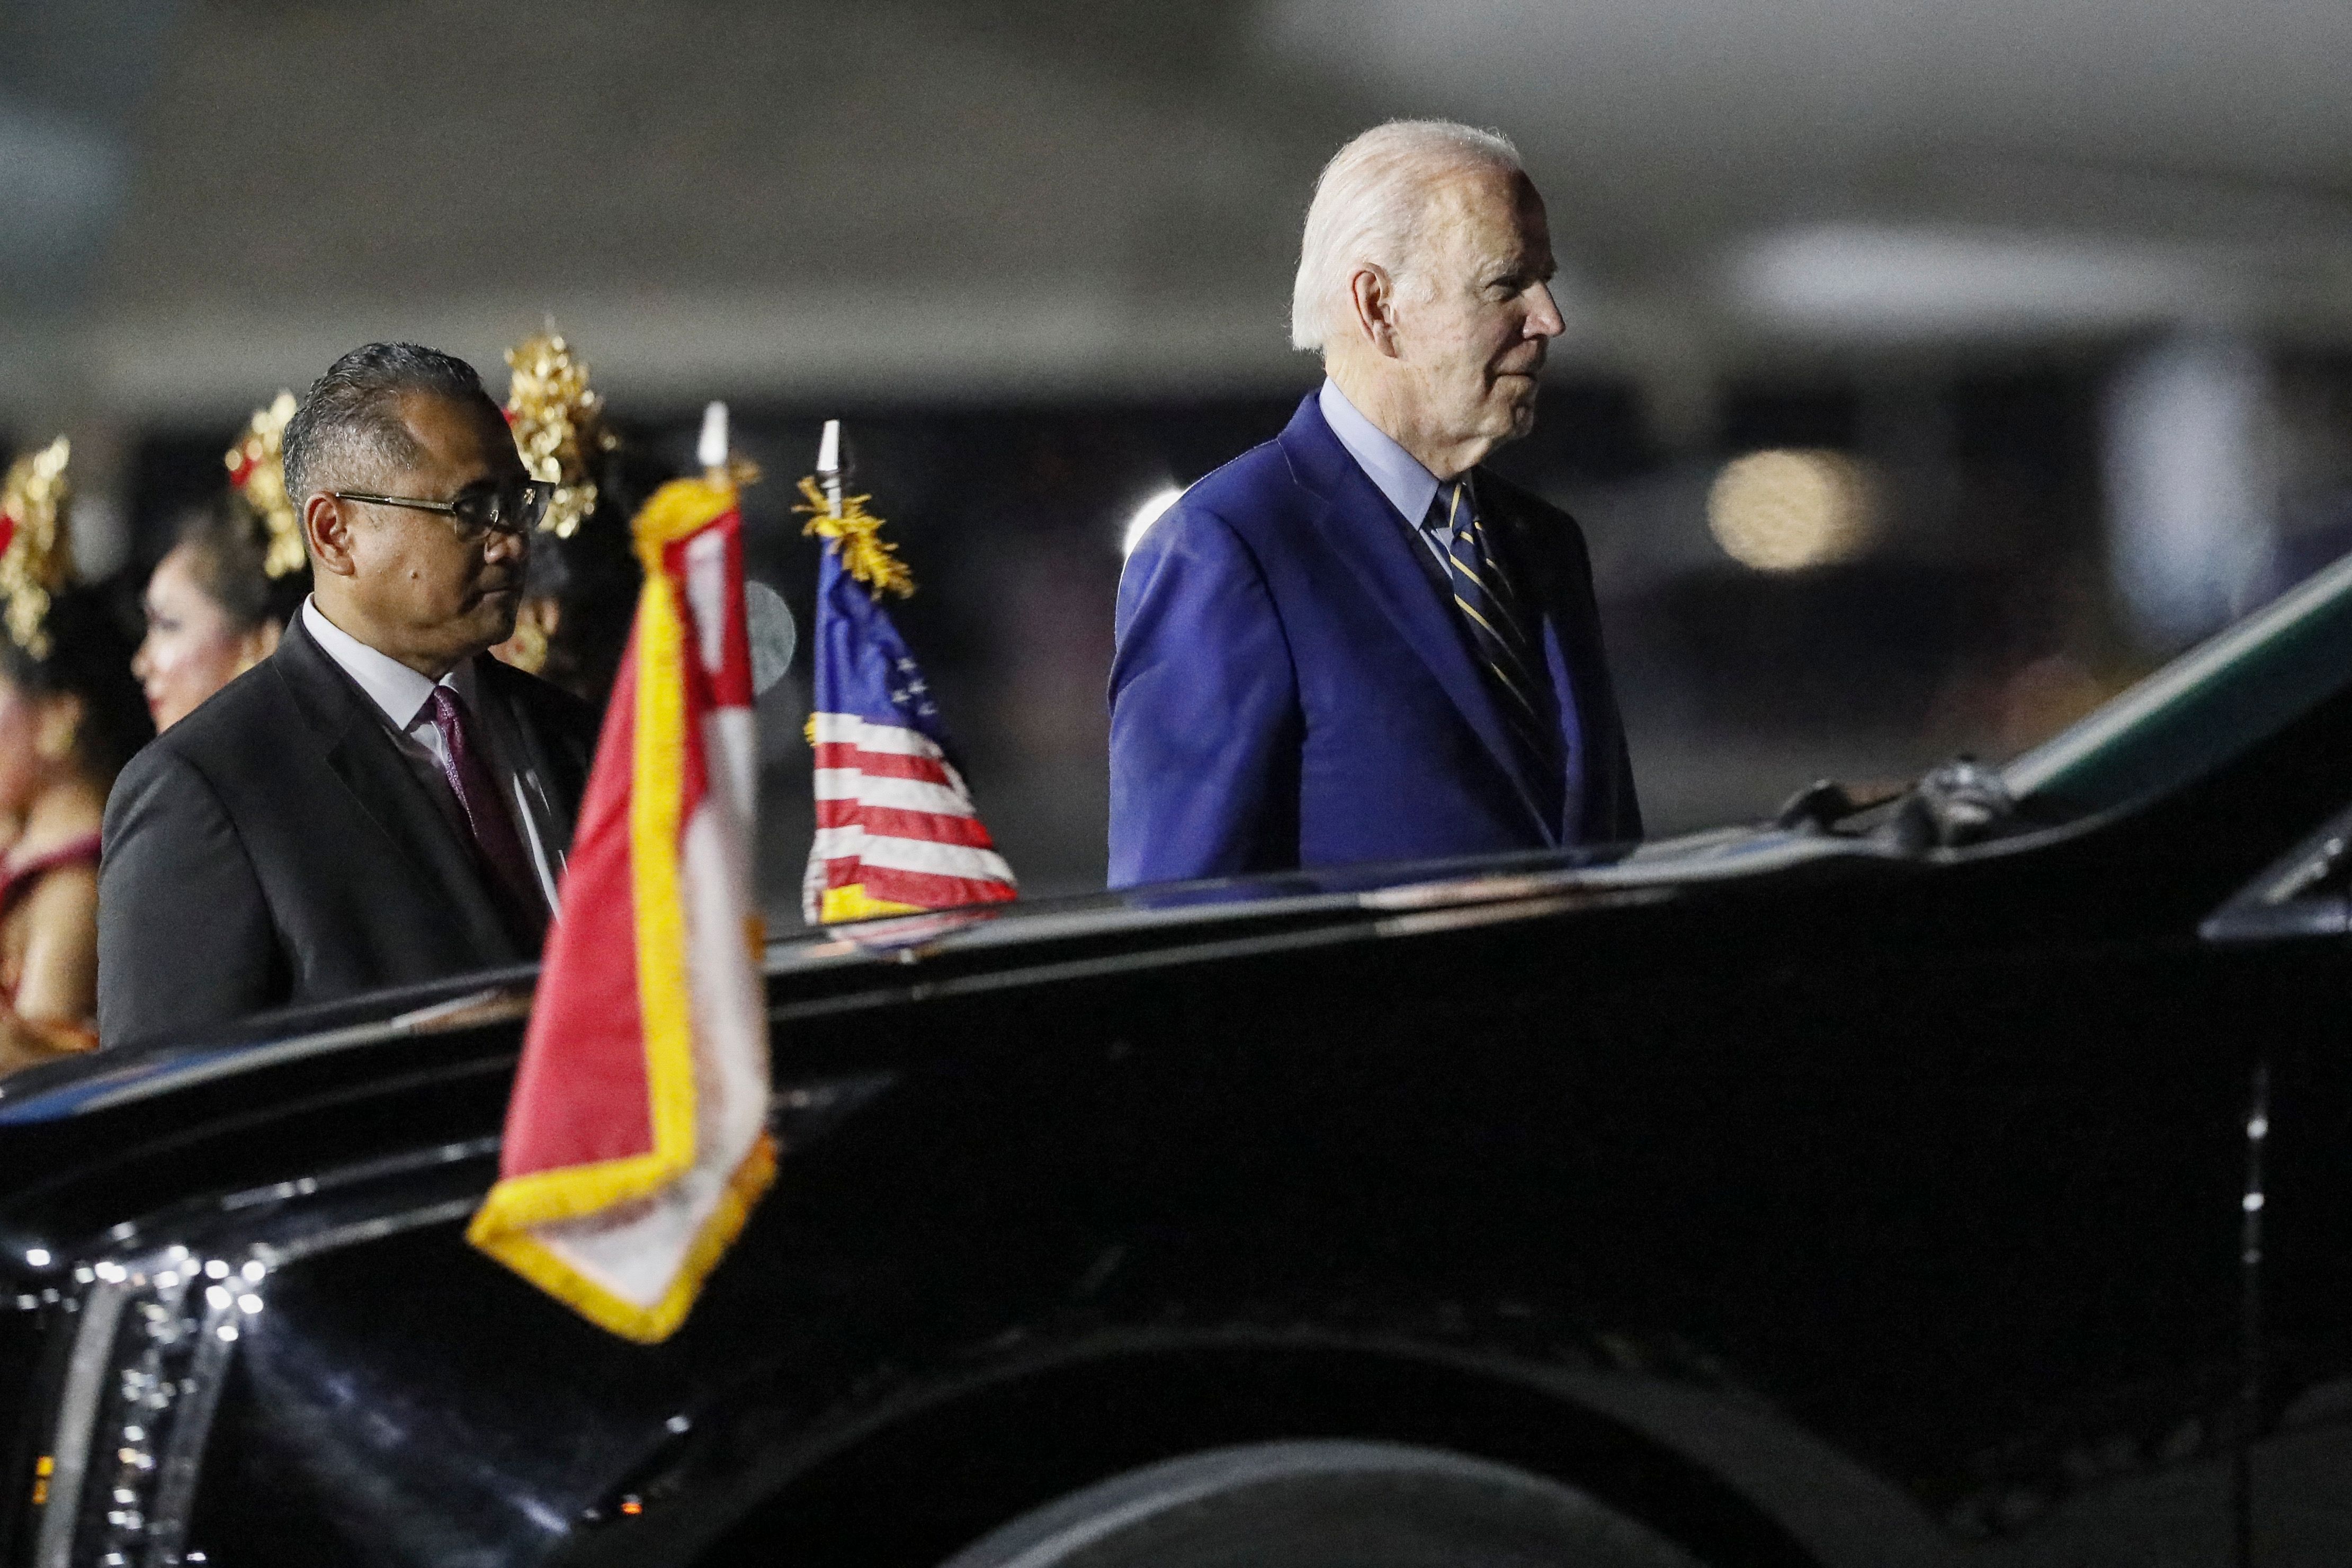 Leaders Land in Indonesia for G-20 Summit; US Seeks No Conflict With China, Says Biden